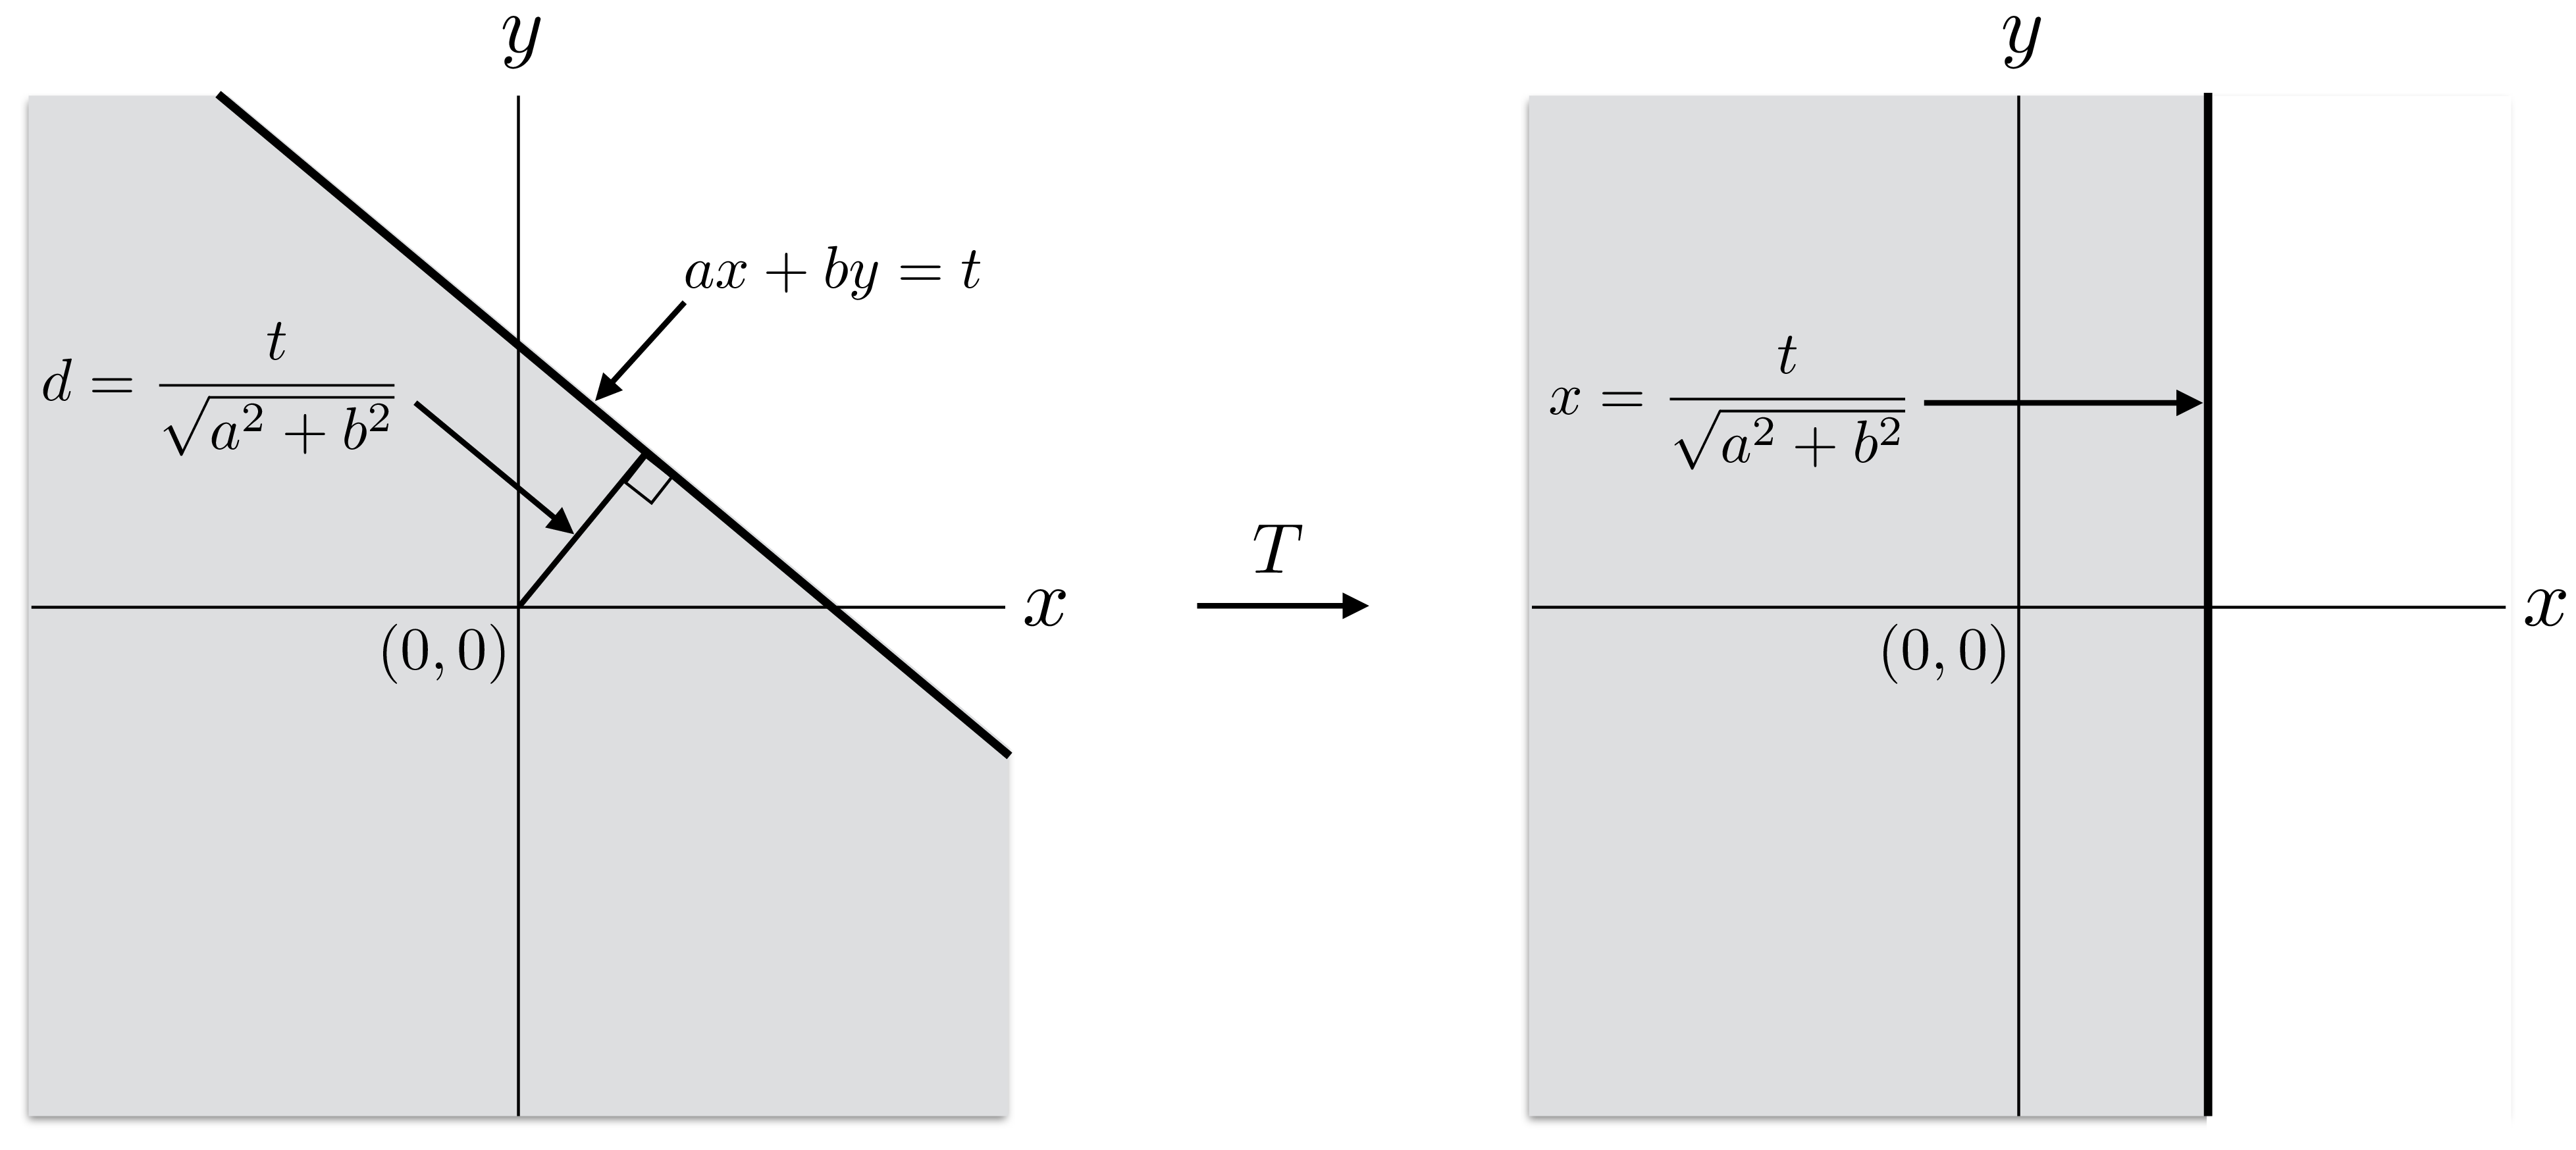 Figure 4: The half plane ax+by \le t is rotated into the half plane x \le t/\sqrt{a^2+b^2}.